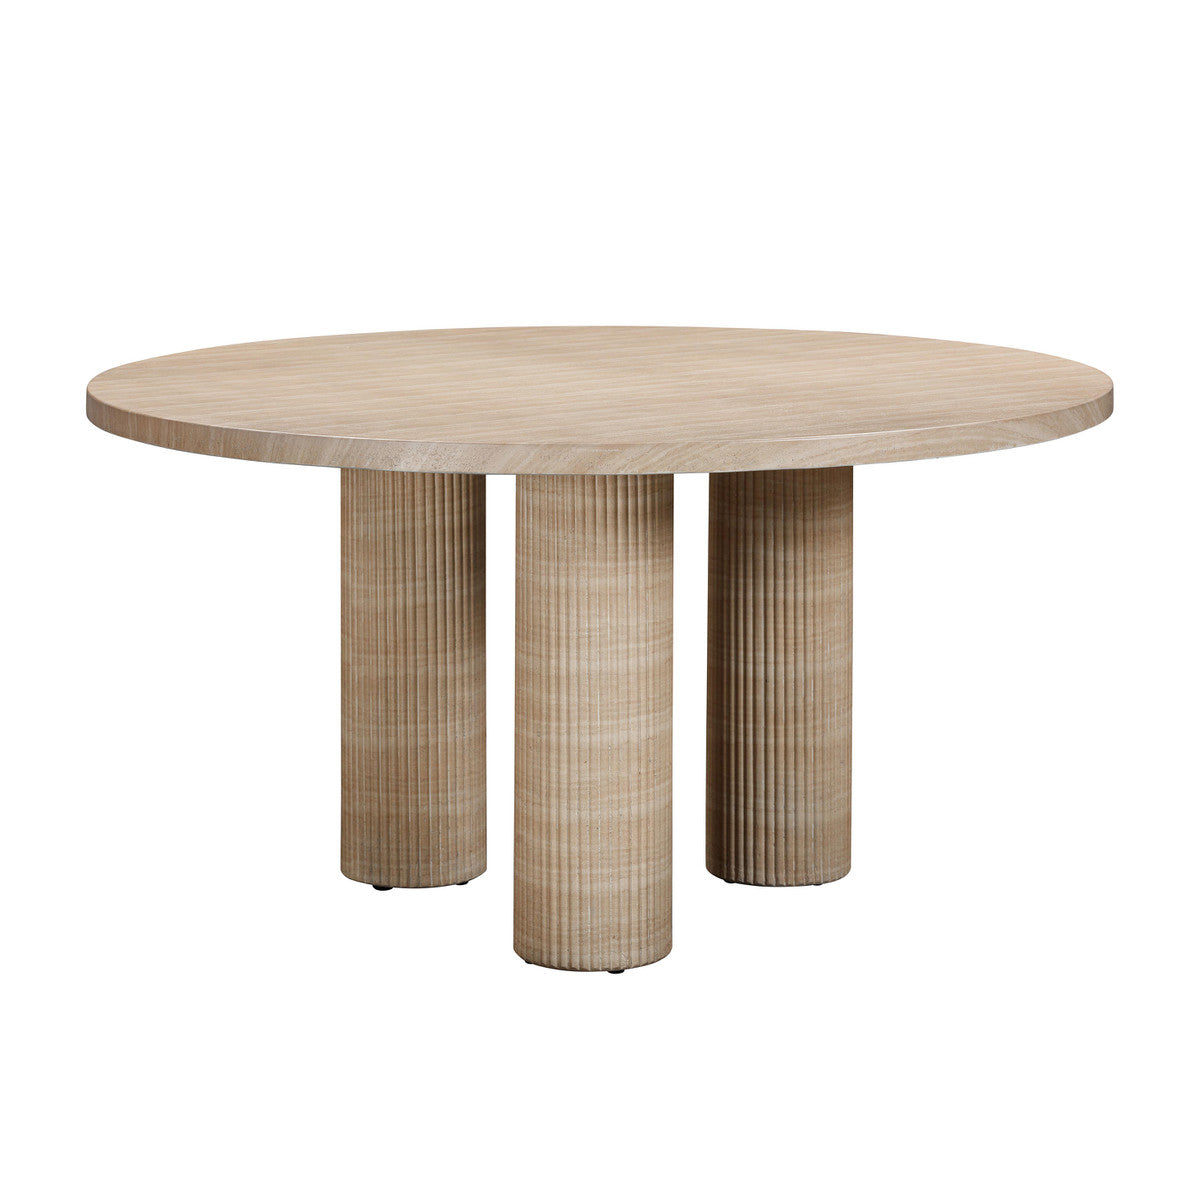 Patti Textured Faux Travertine Indoor / Outdoor Round Dining Table